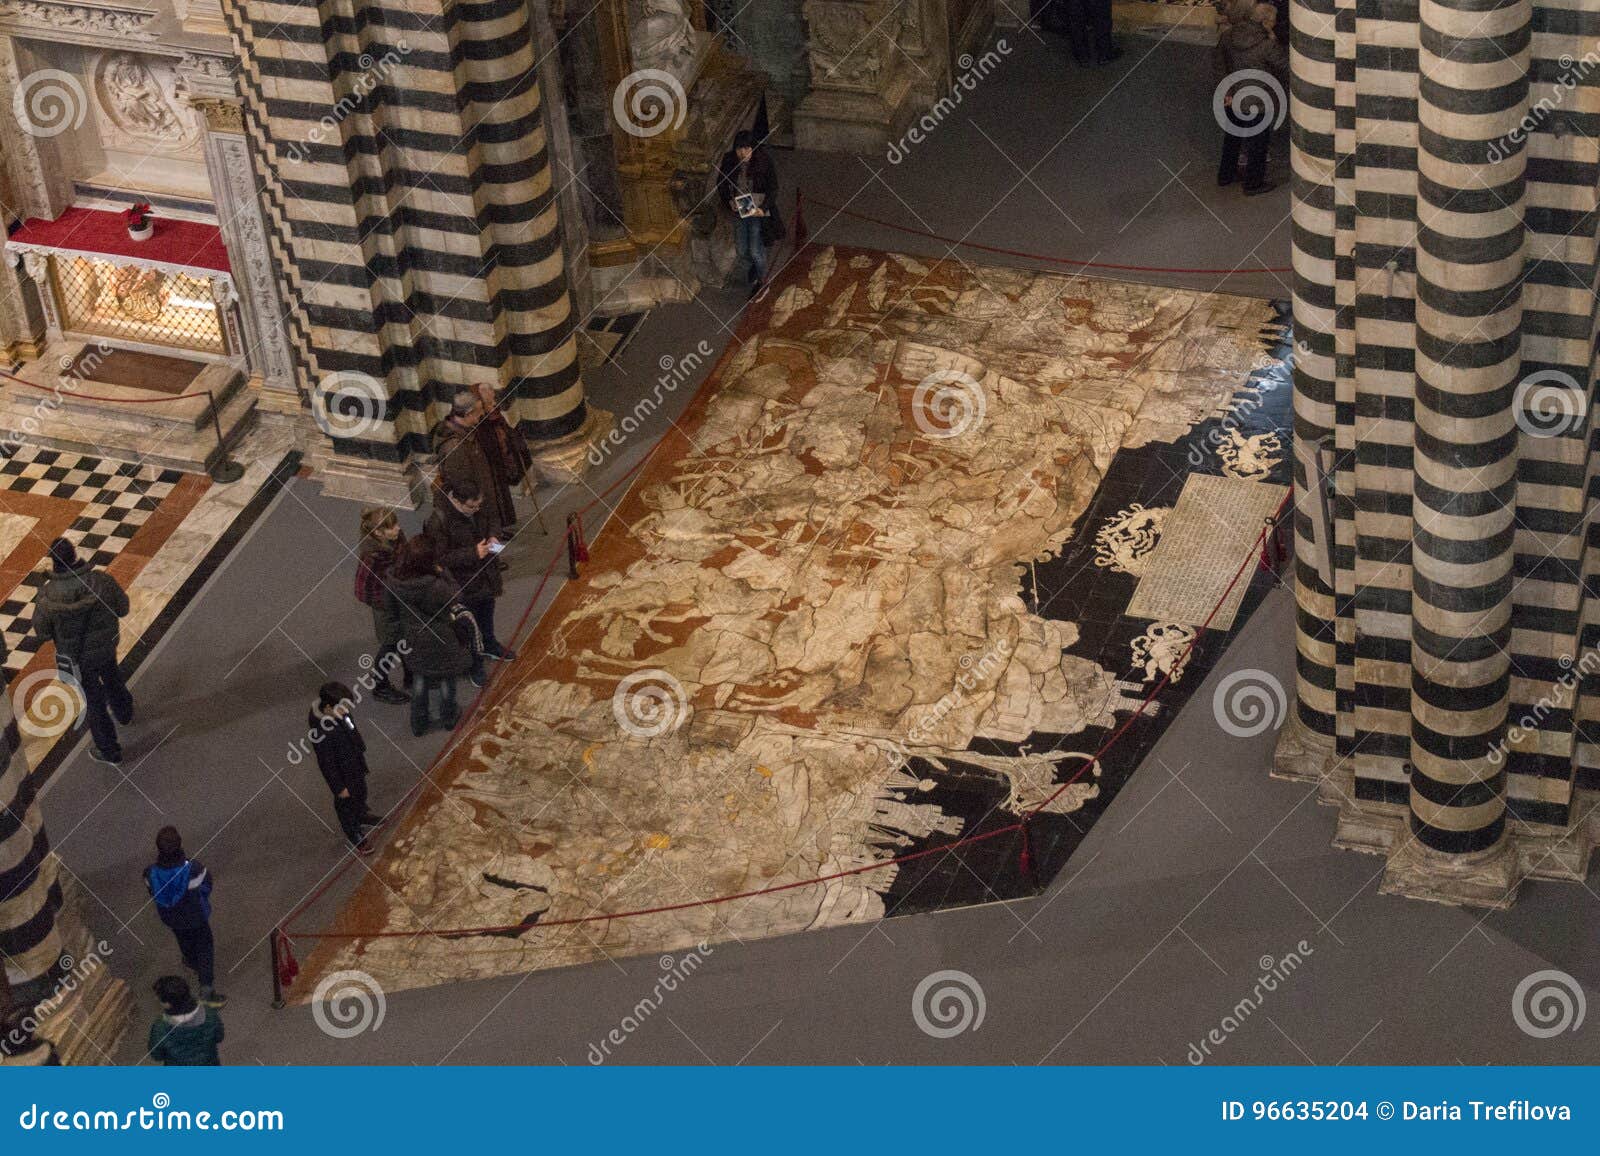 Mosaic Floor Of The Siena Cathedral Tuscany Italy Editorial